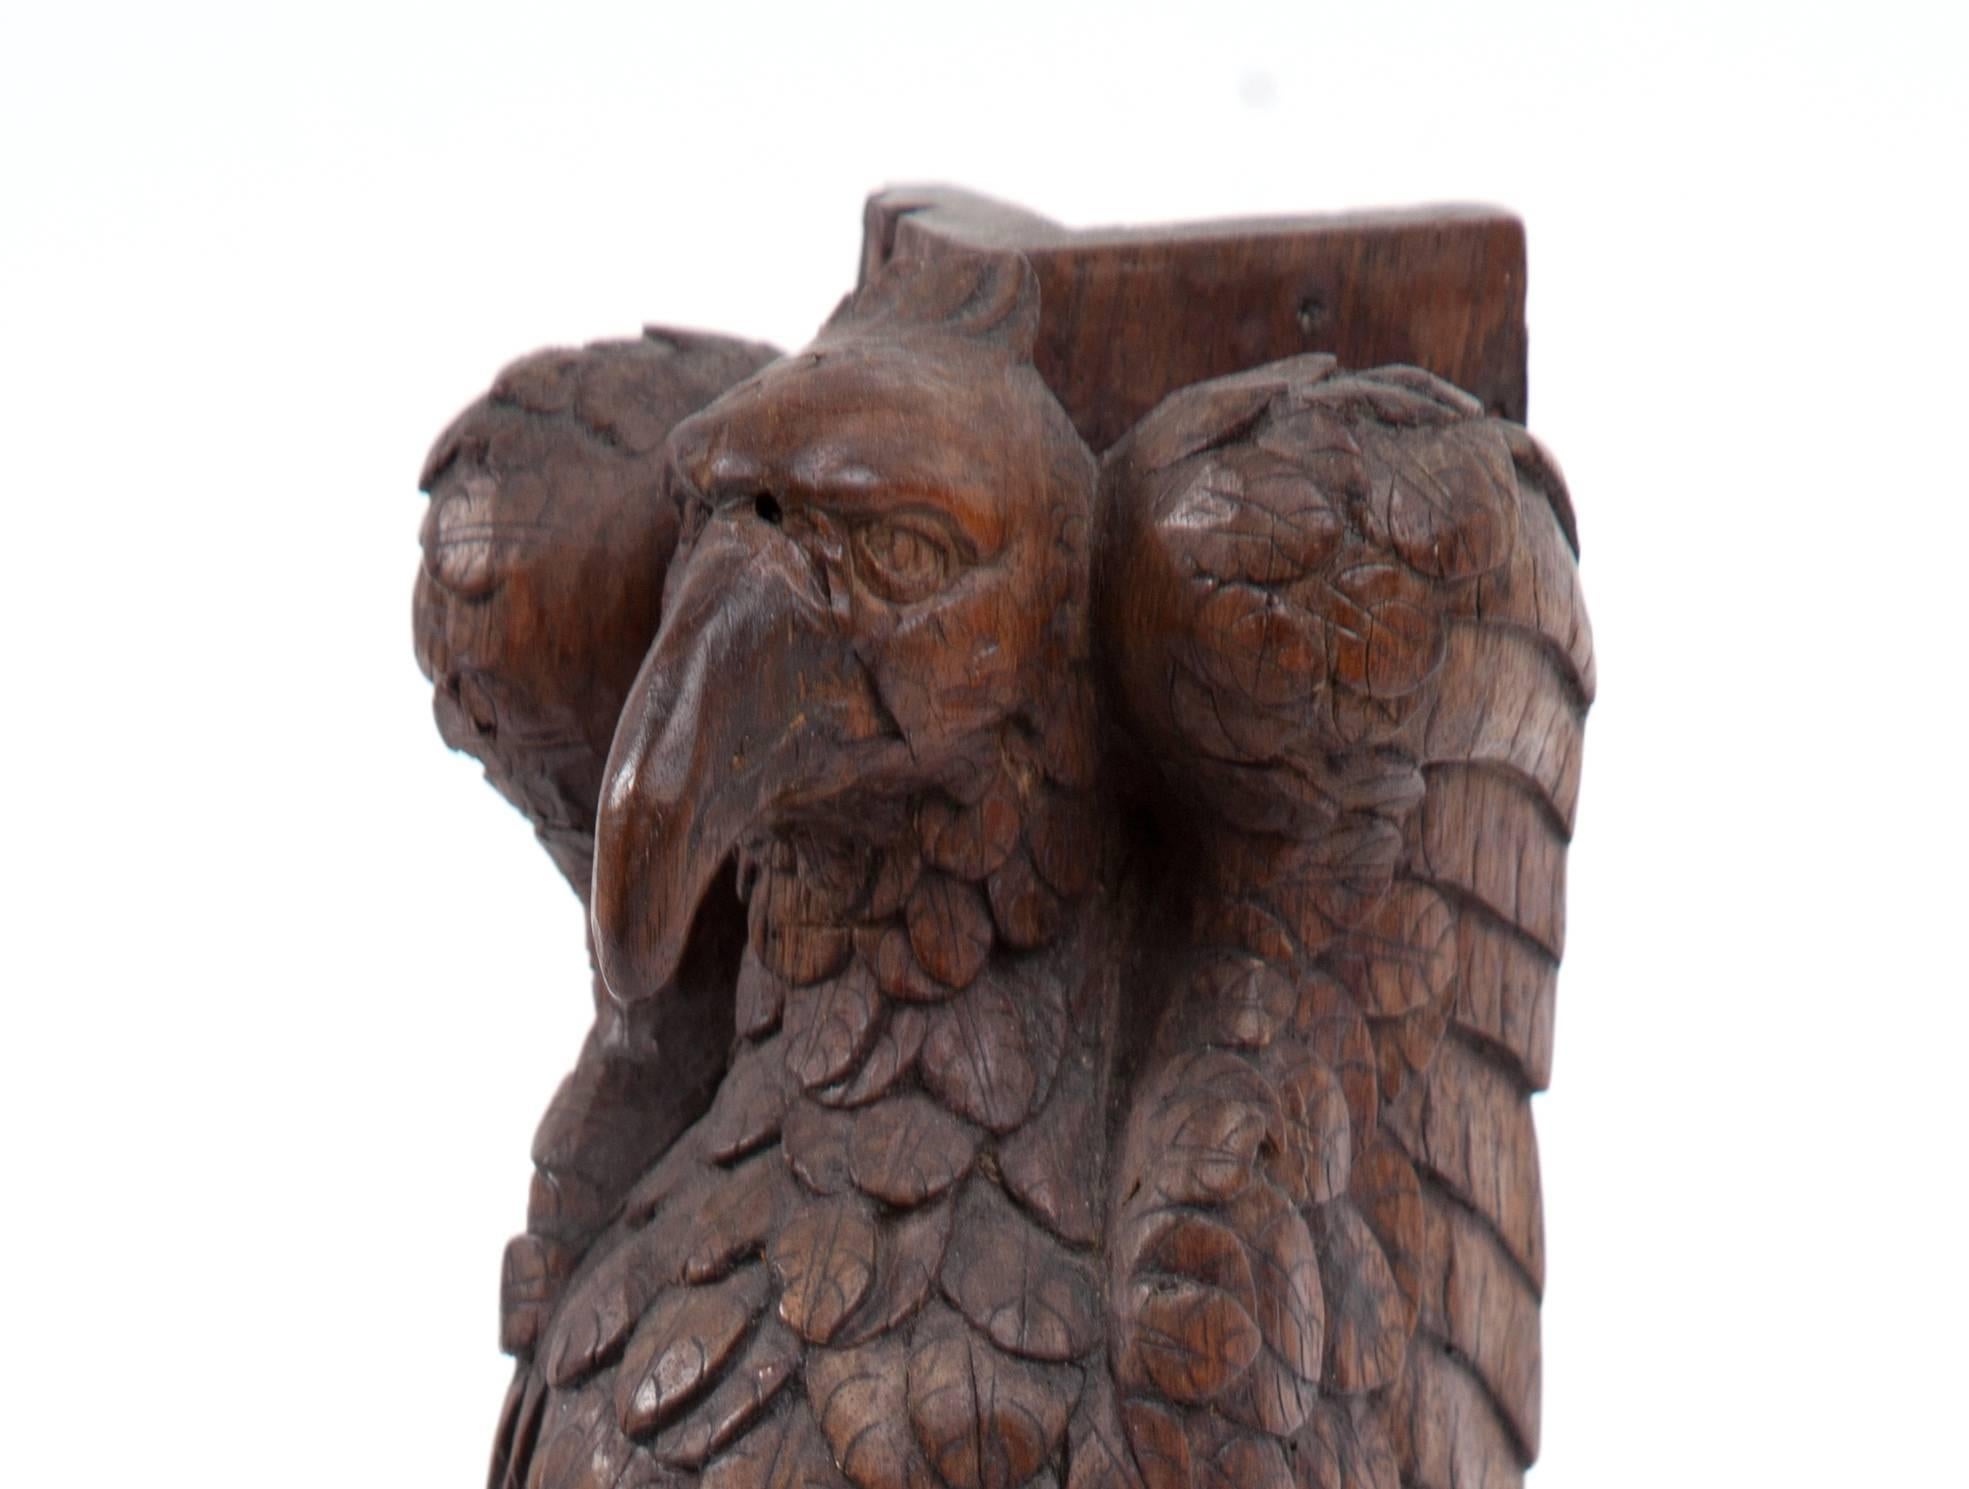 Very handsome and masculine antique carved eagle fragment. The back is at a right angle. It would have attached at a corner.